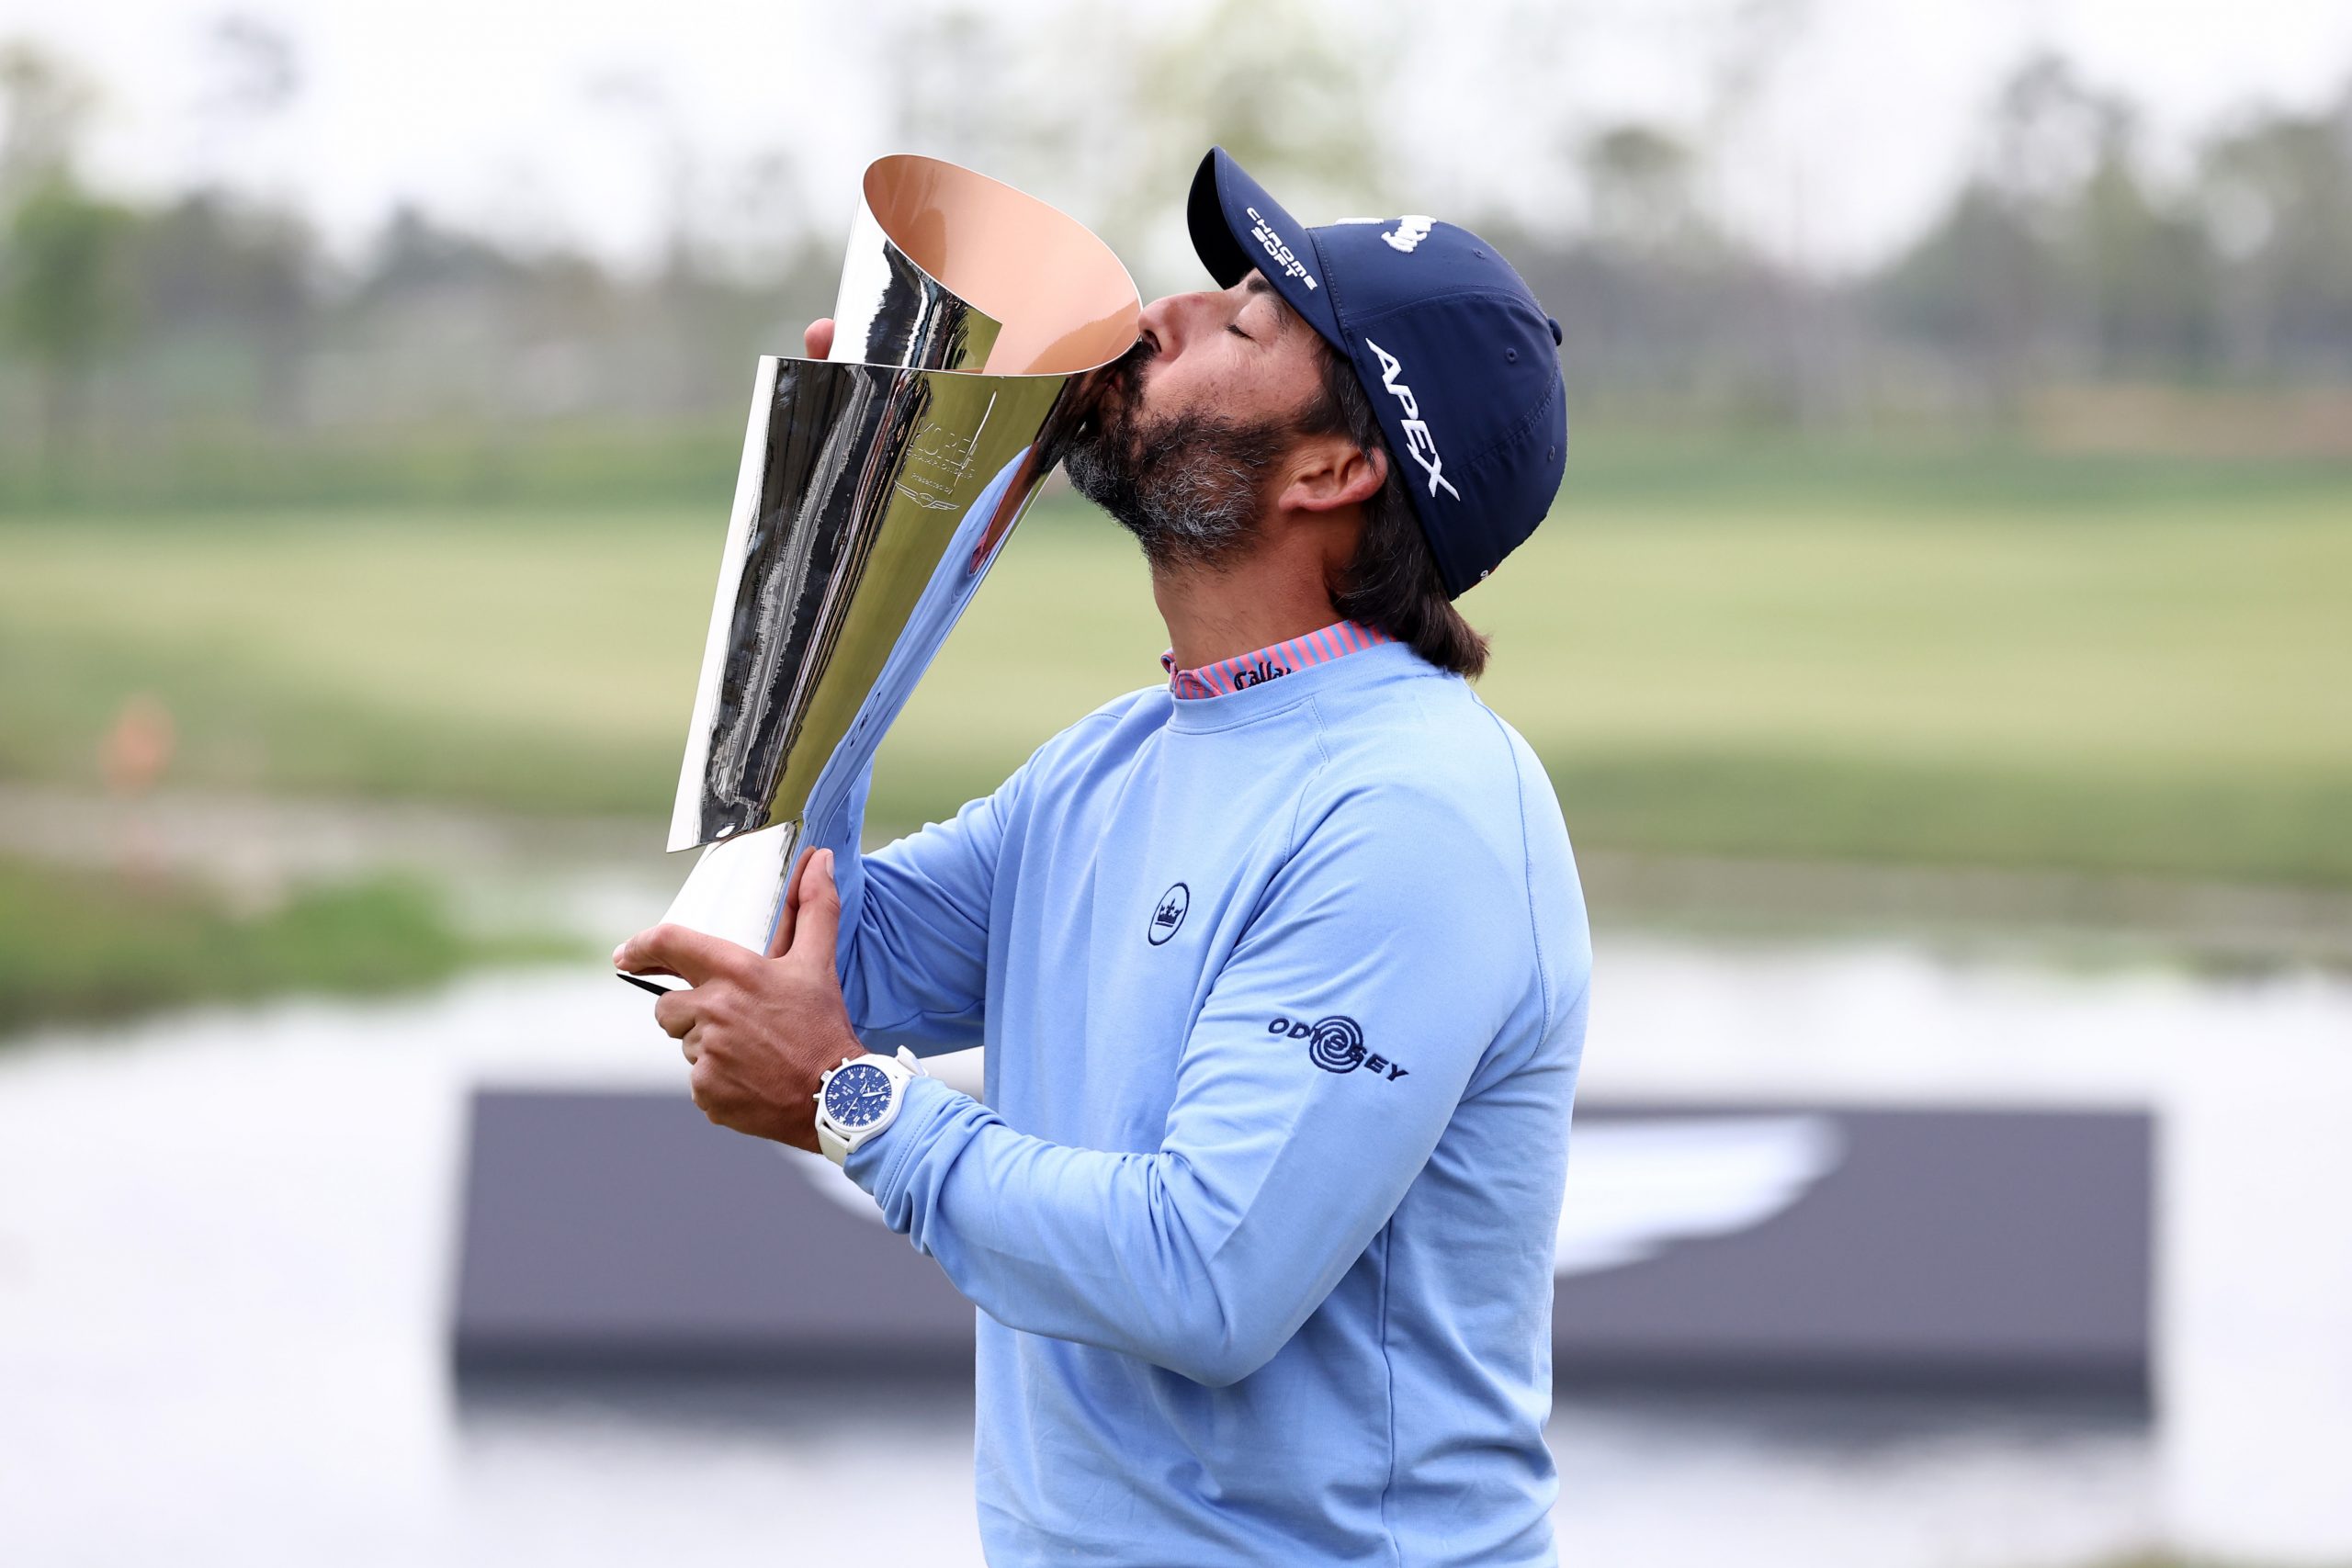 Sharma finishes with 69 as Spaniard Larrazabal wins title in Korea